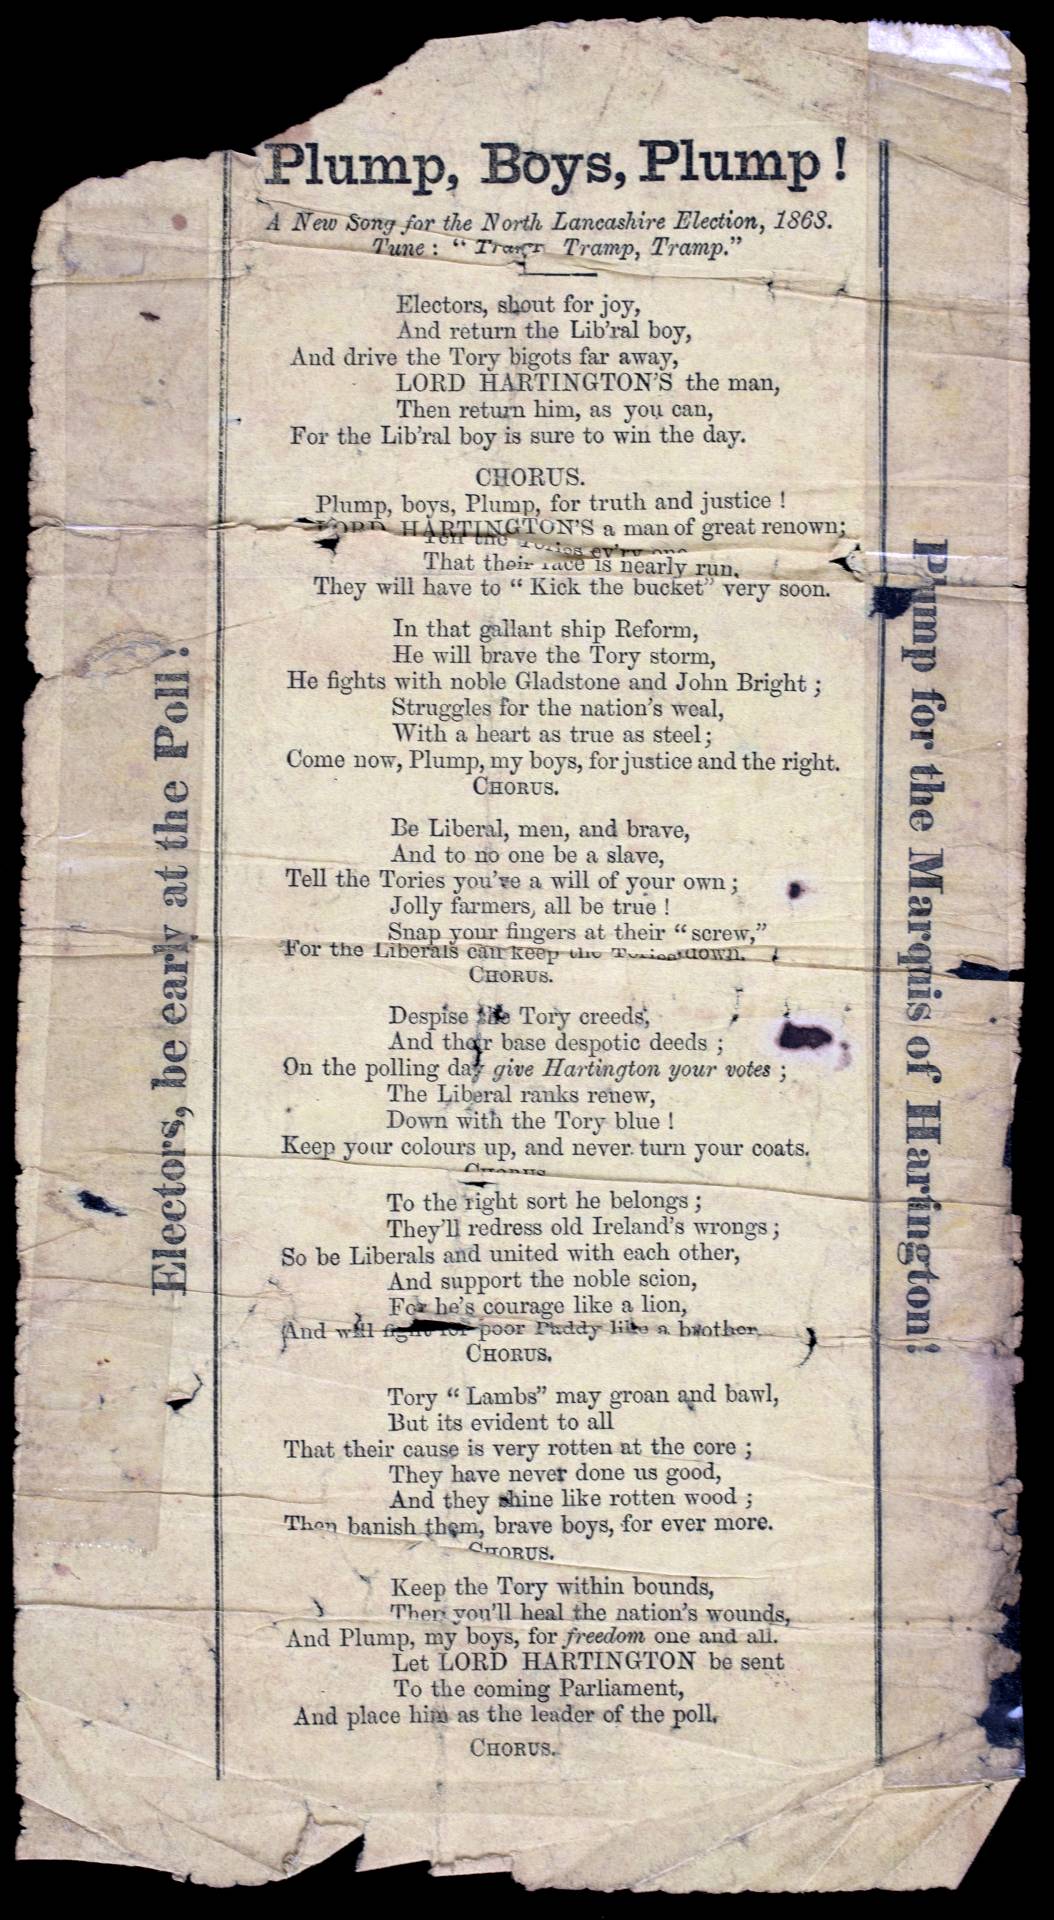 A damaged typed song sheet for the song "Plump, Boys, Plumb!"